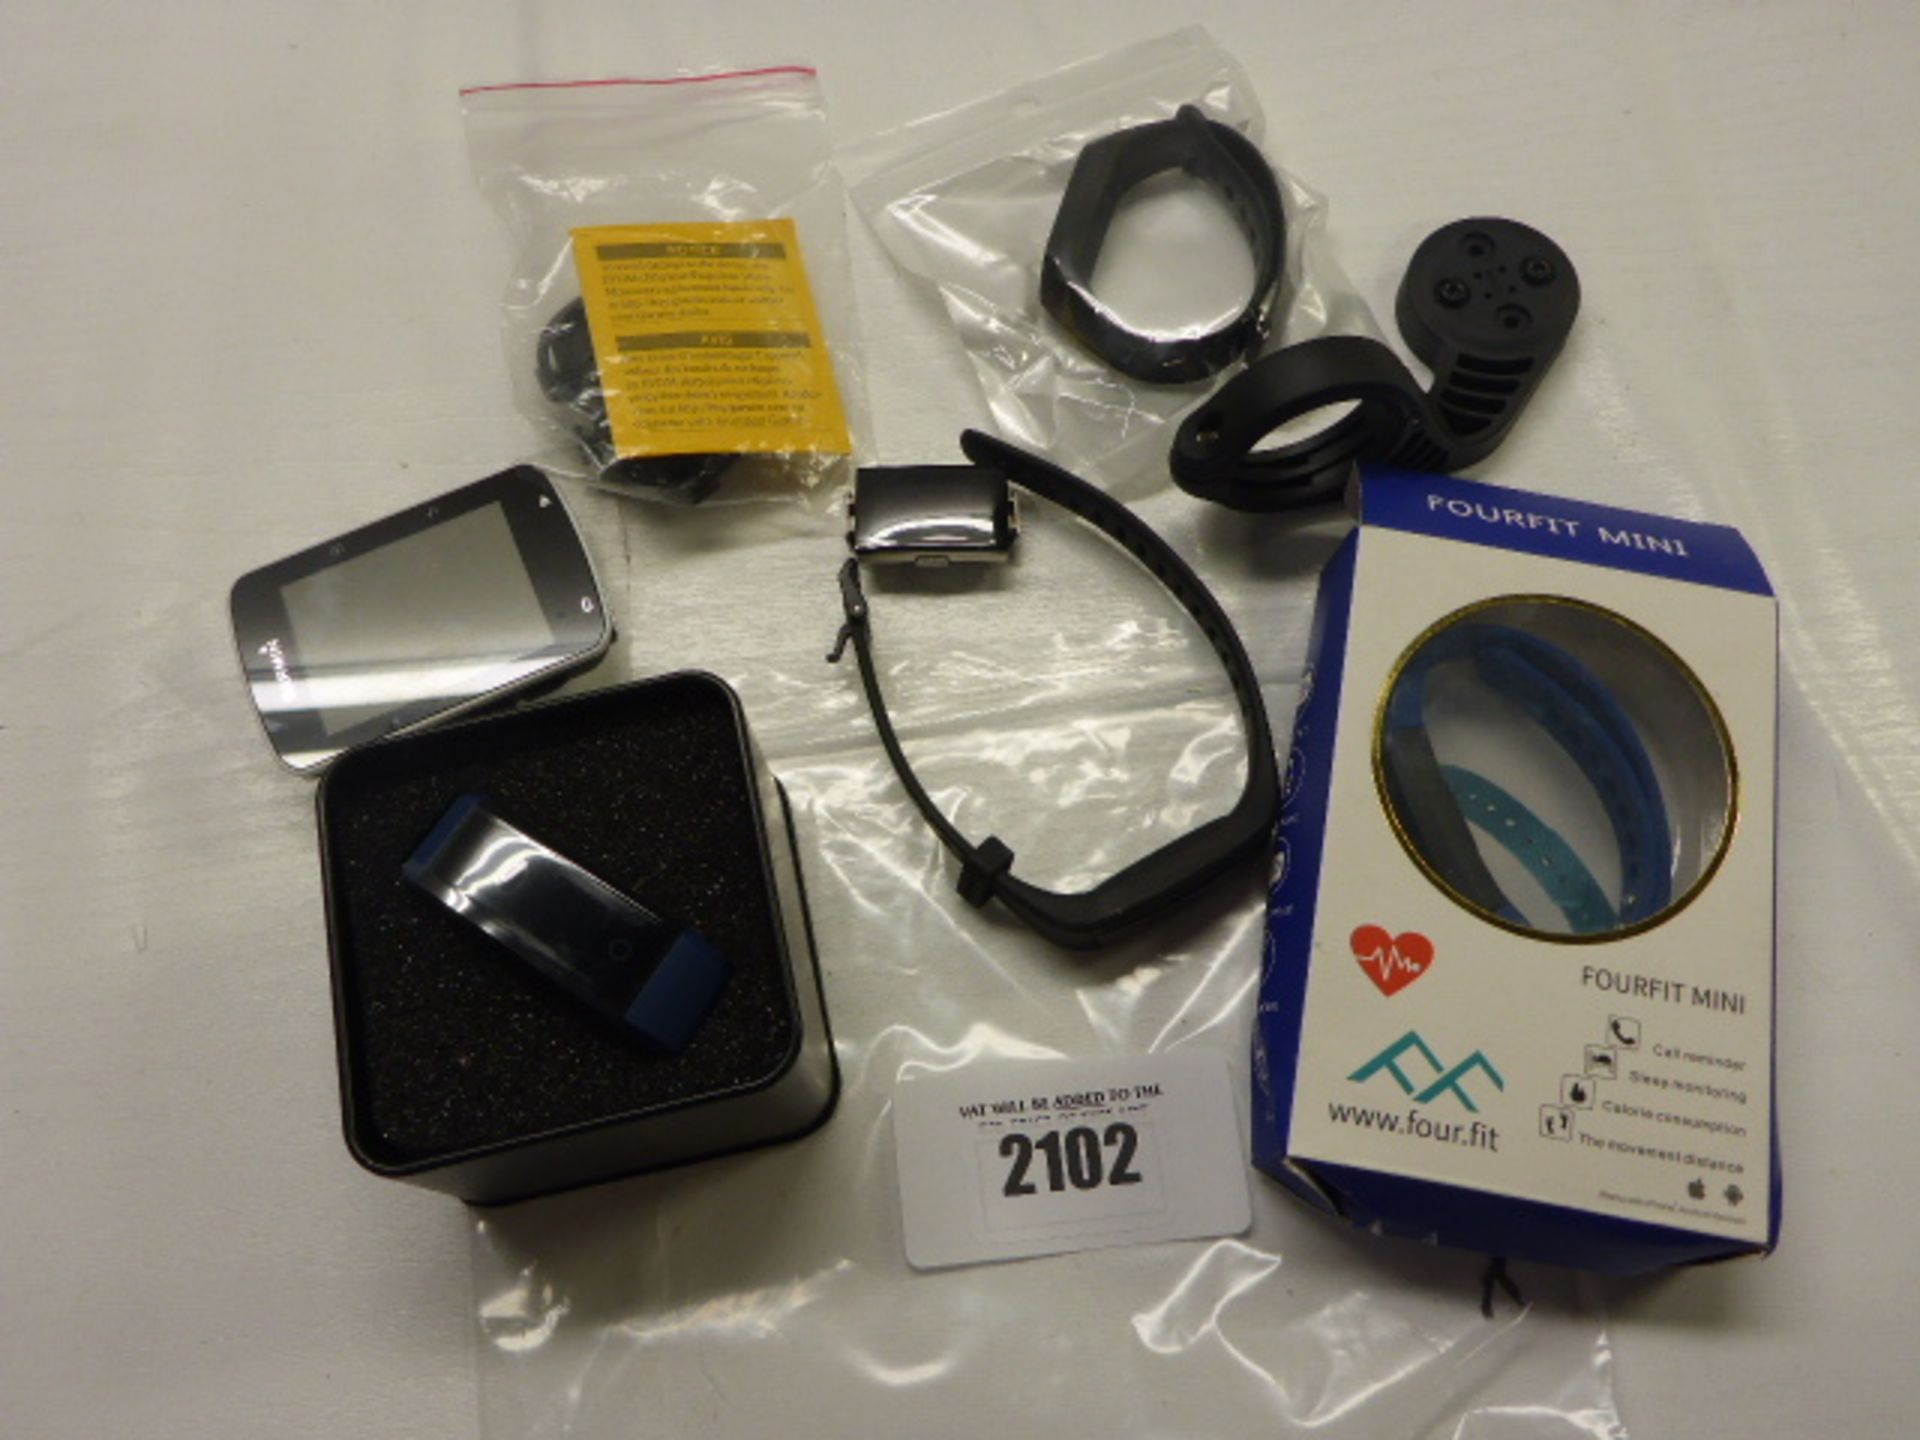 Various activity trackers